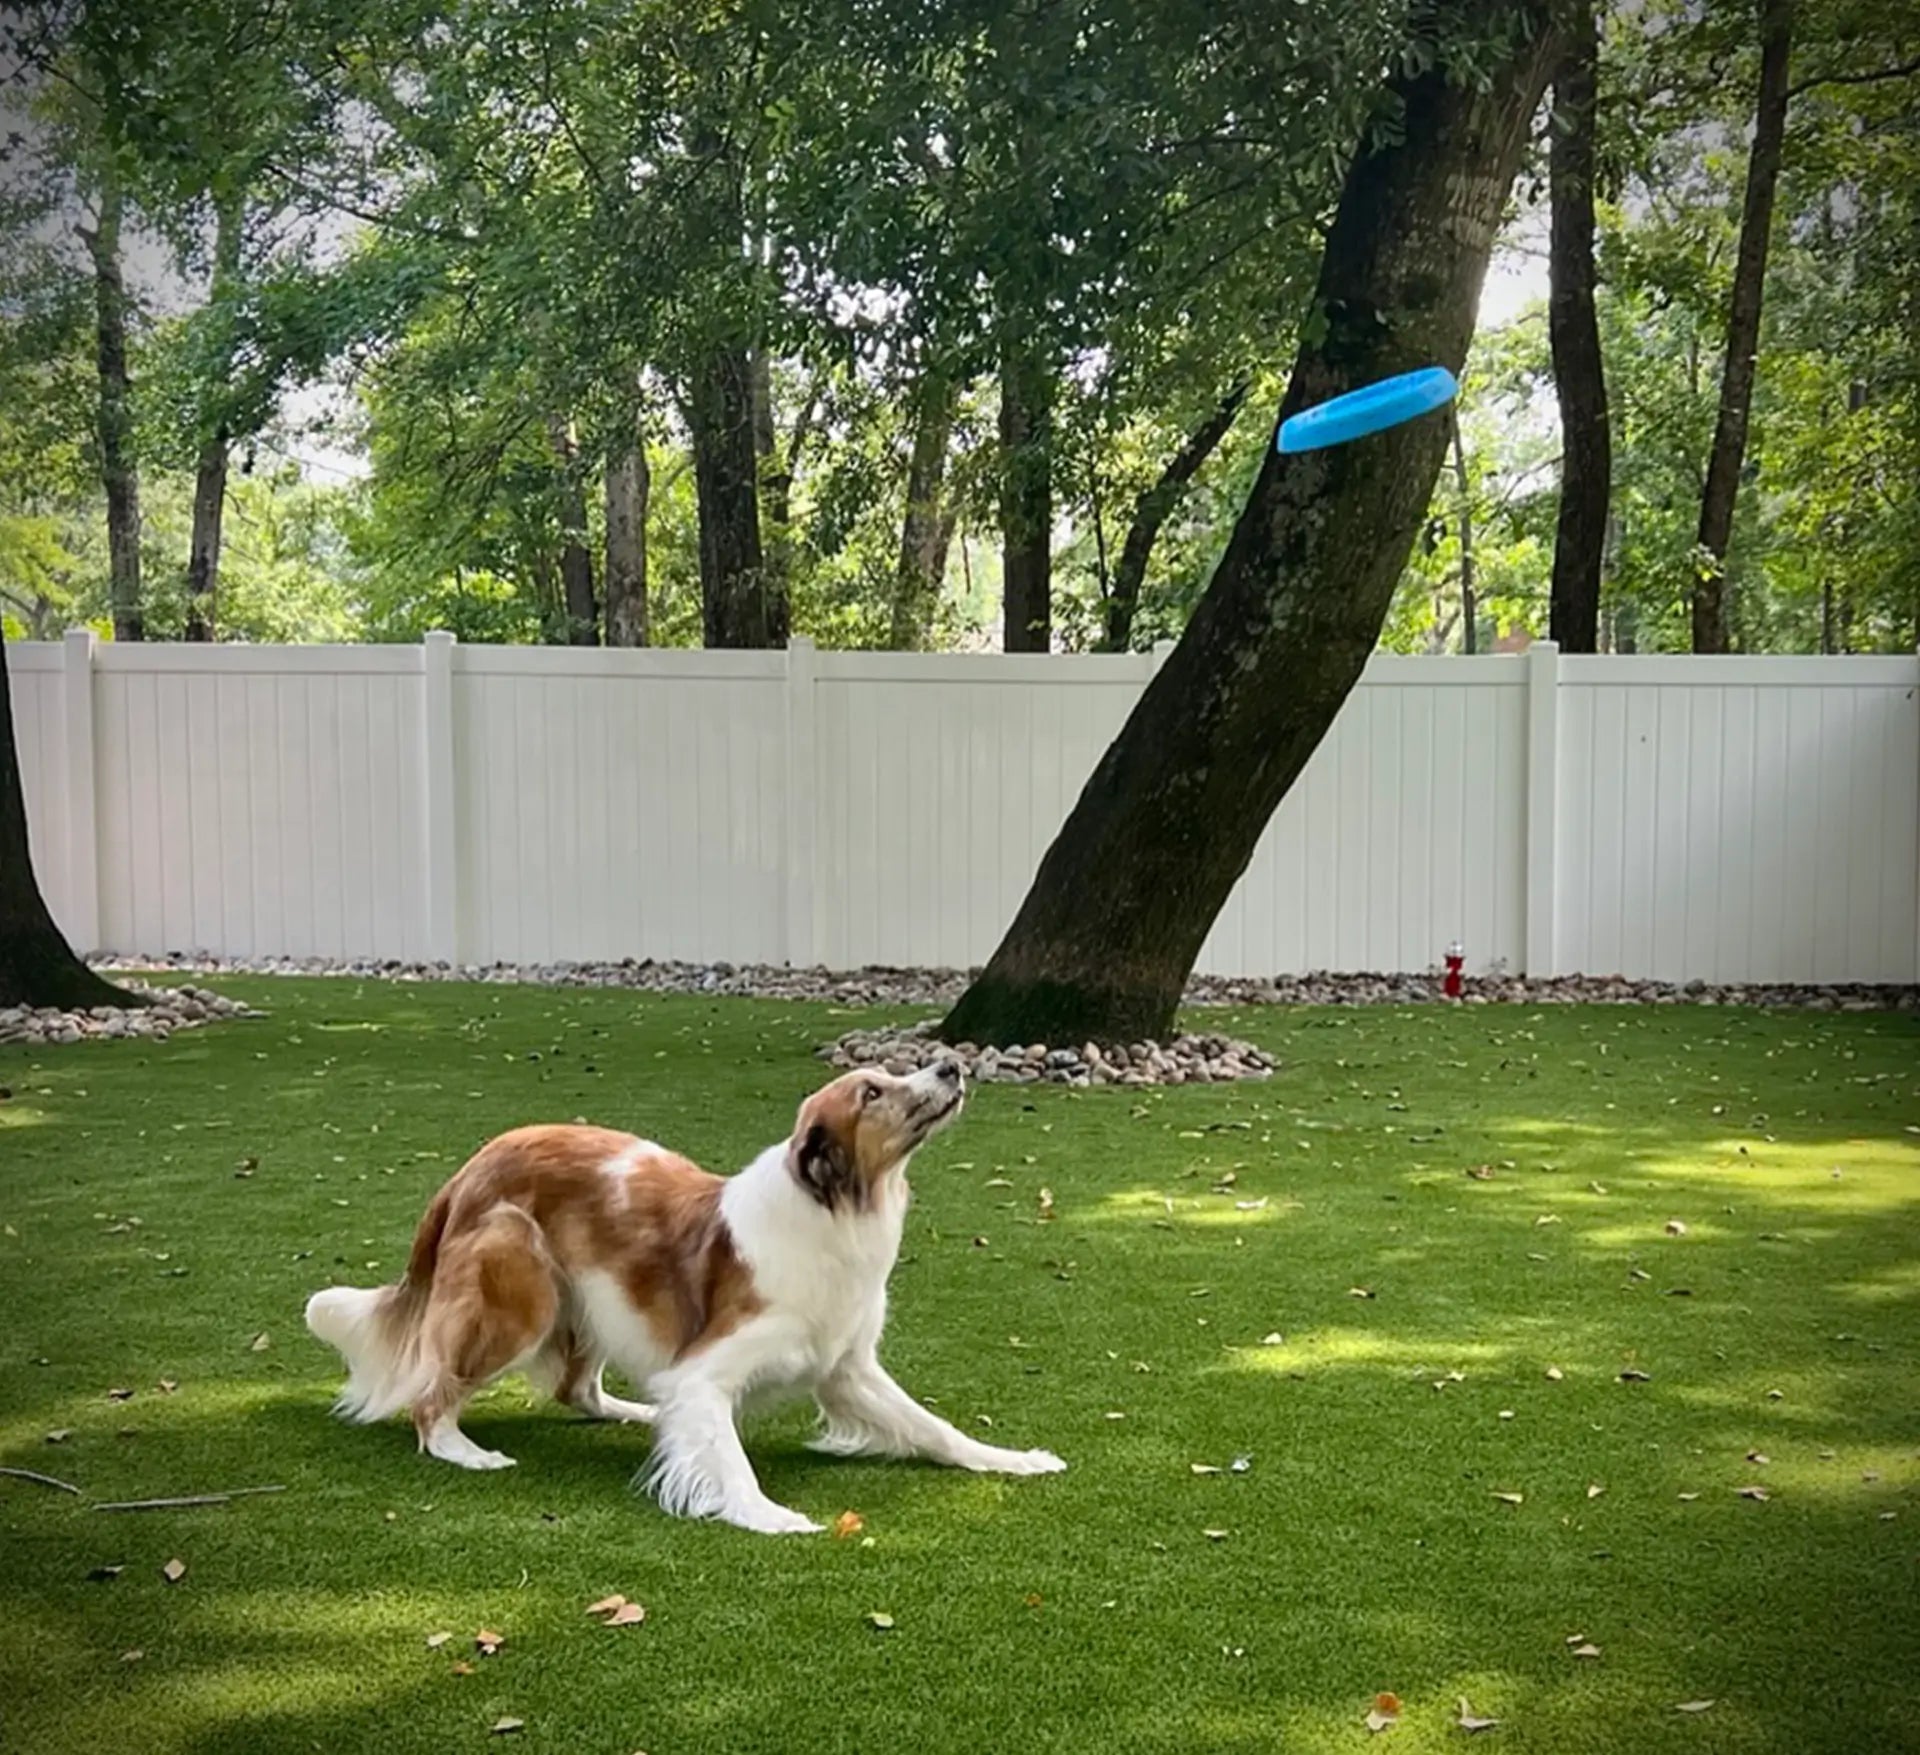 Border Collie is about to jump and catch the blue dog frisbee.